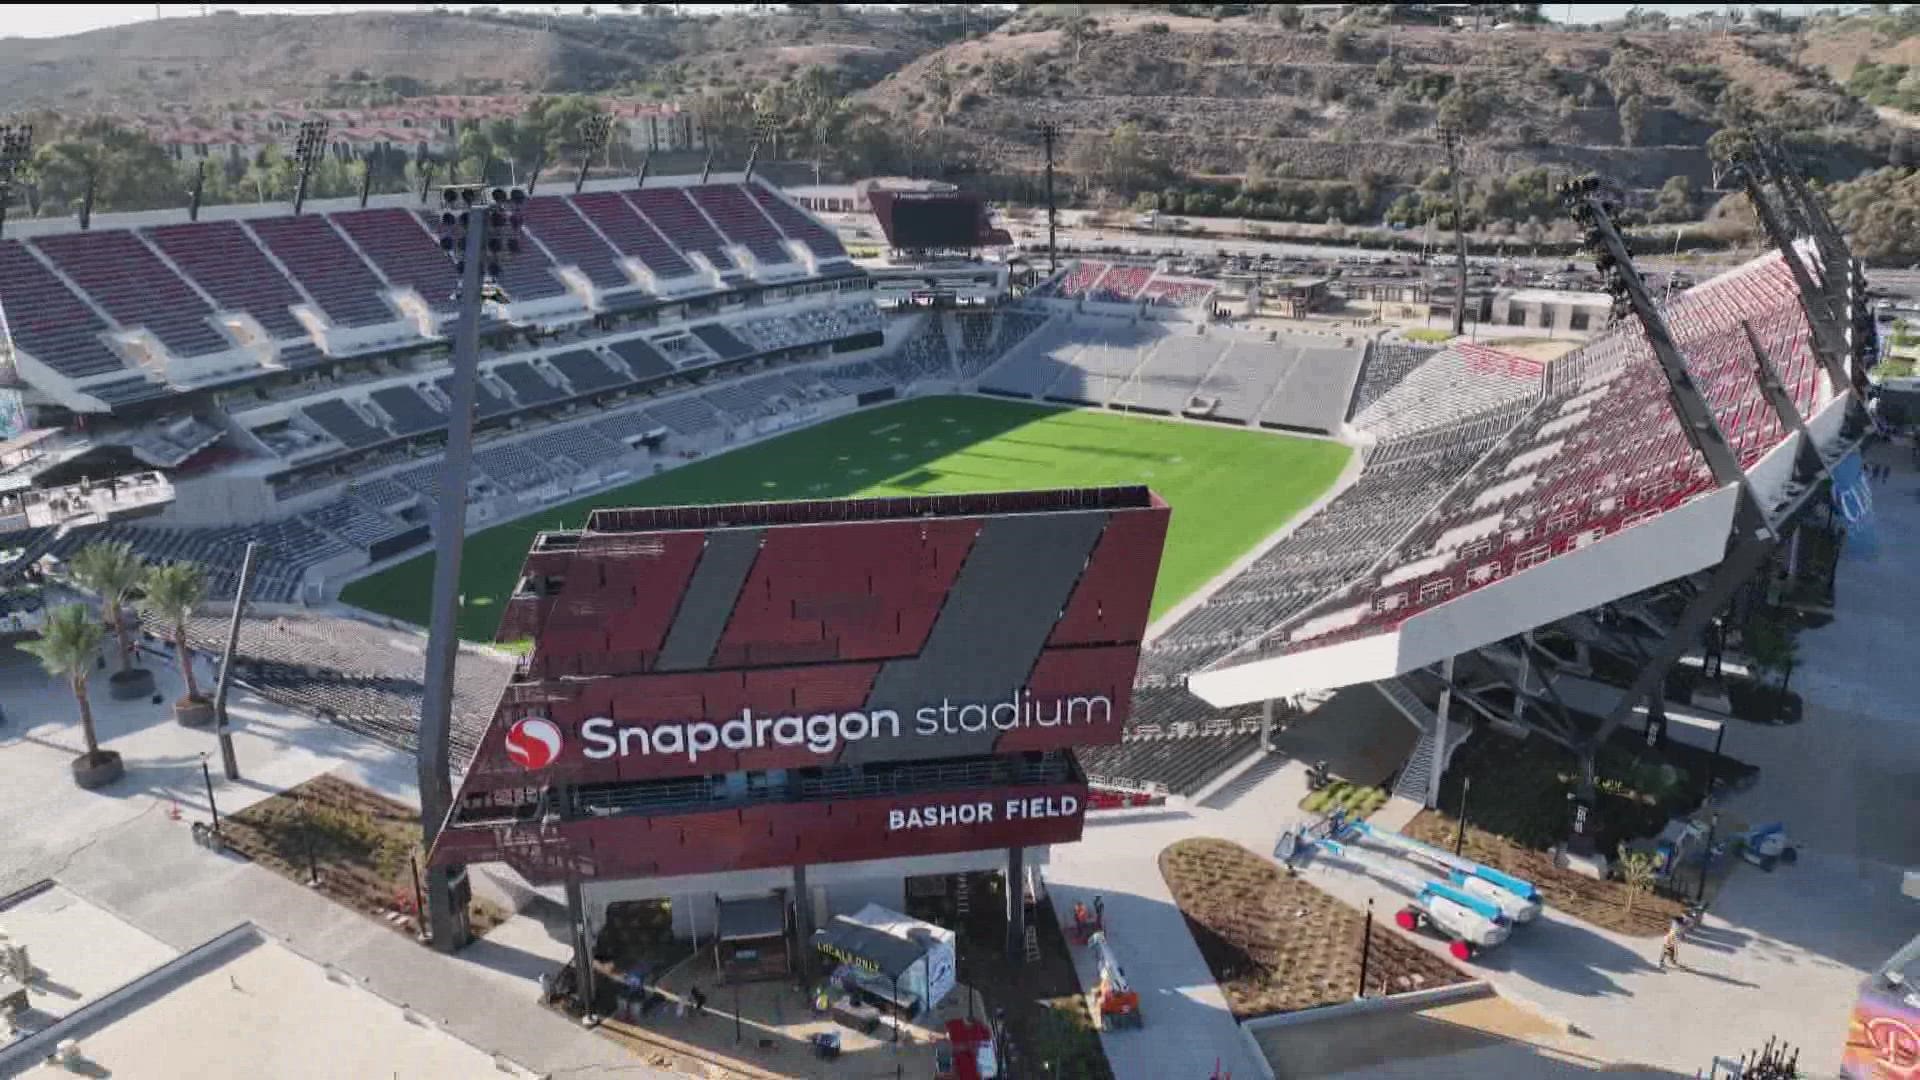 Snapdragon’s says their goal is to make SDSU the most connected campus in the nation on and off the field.